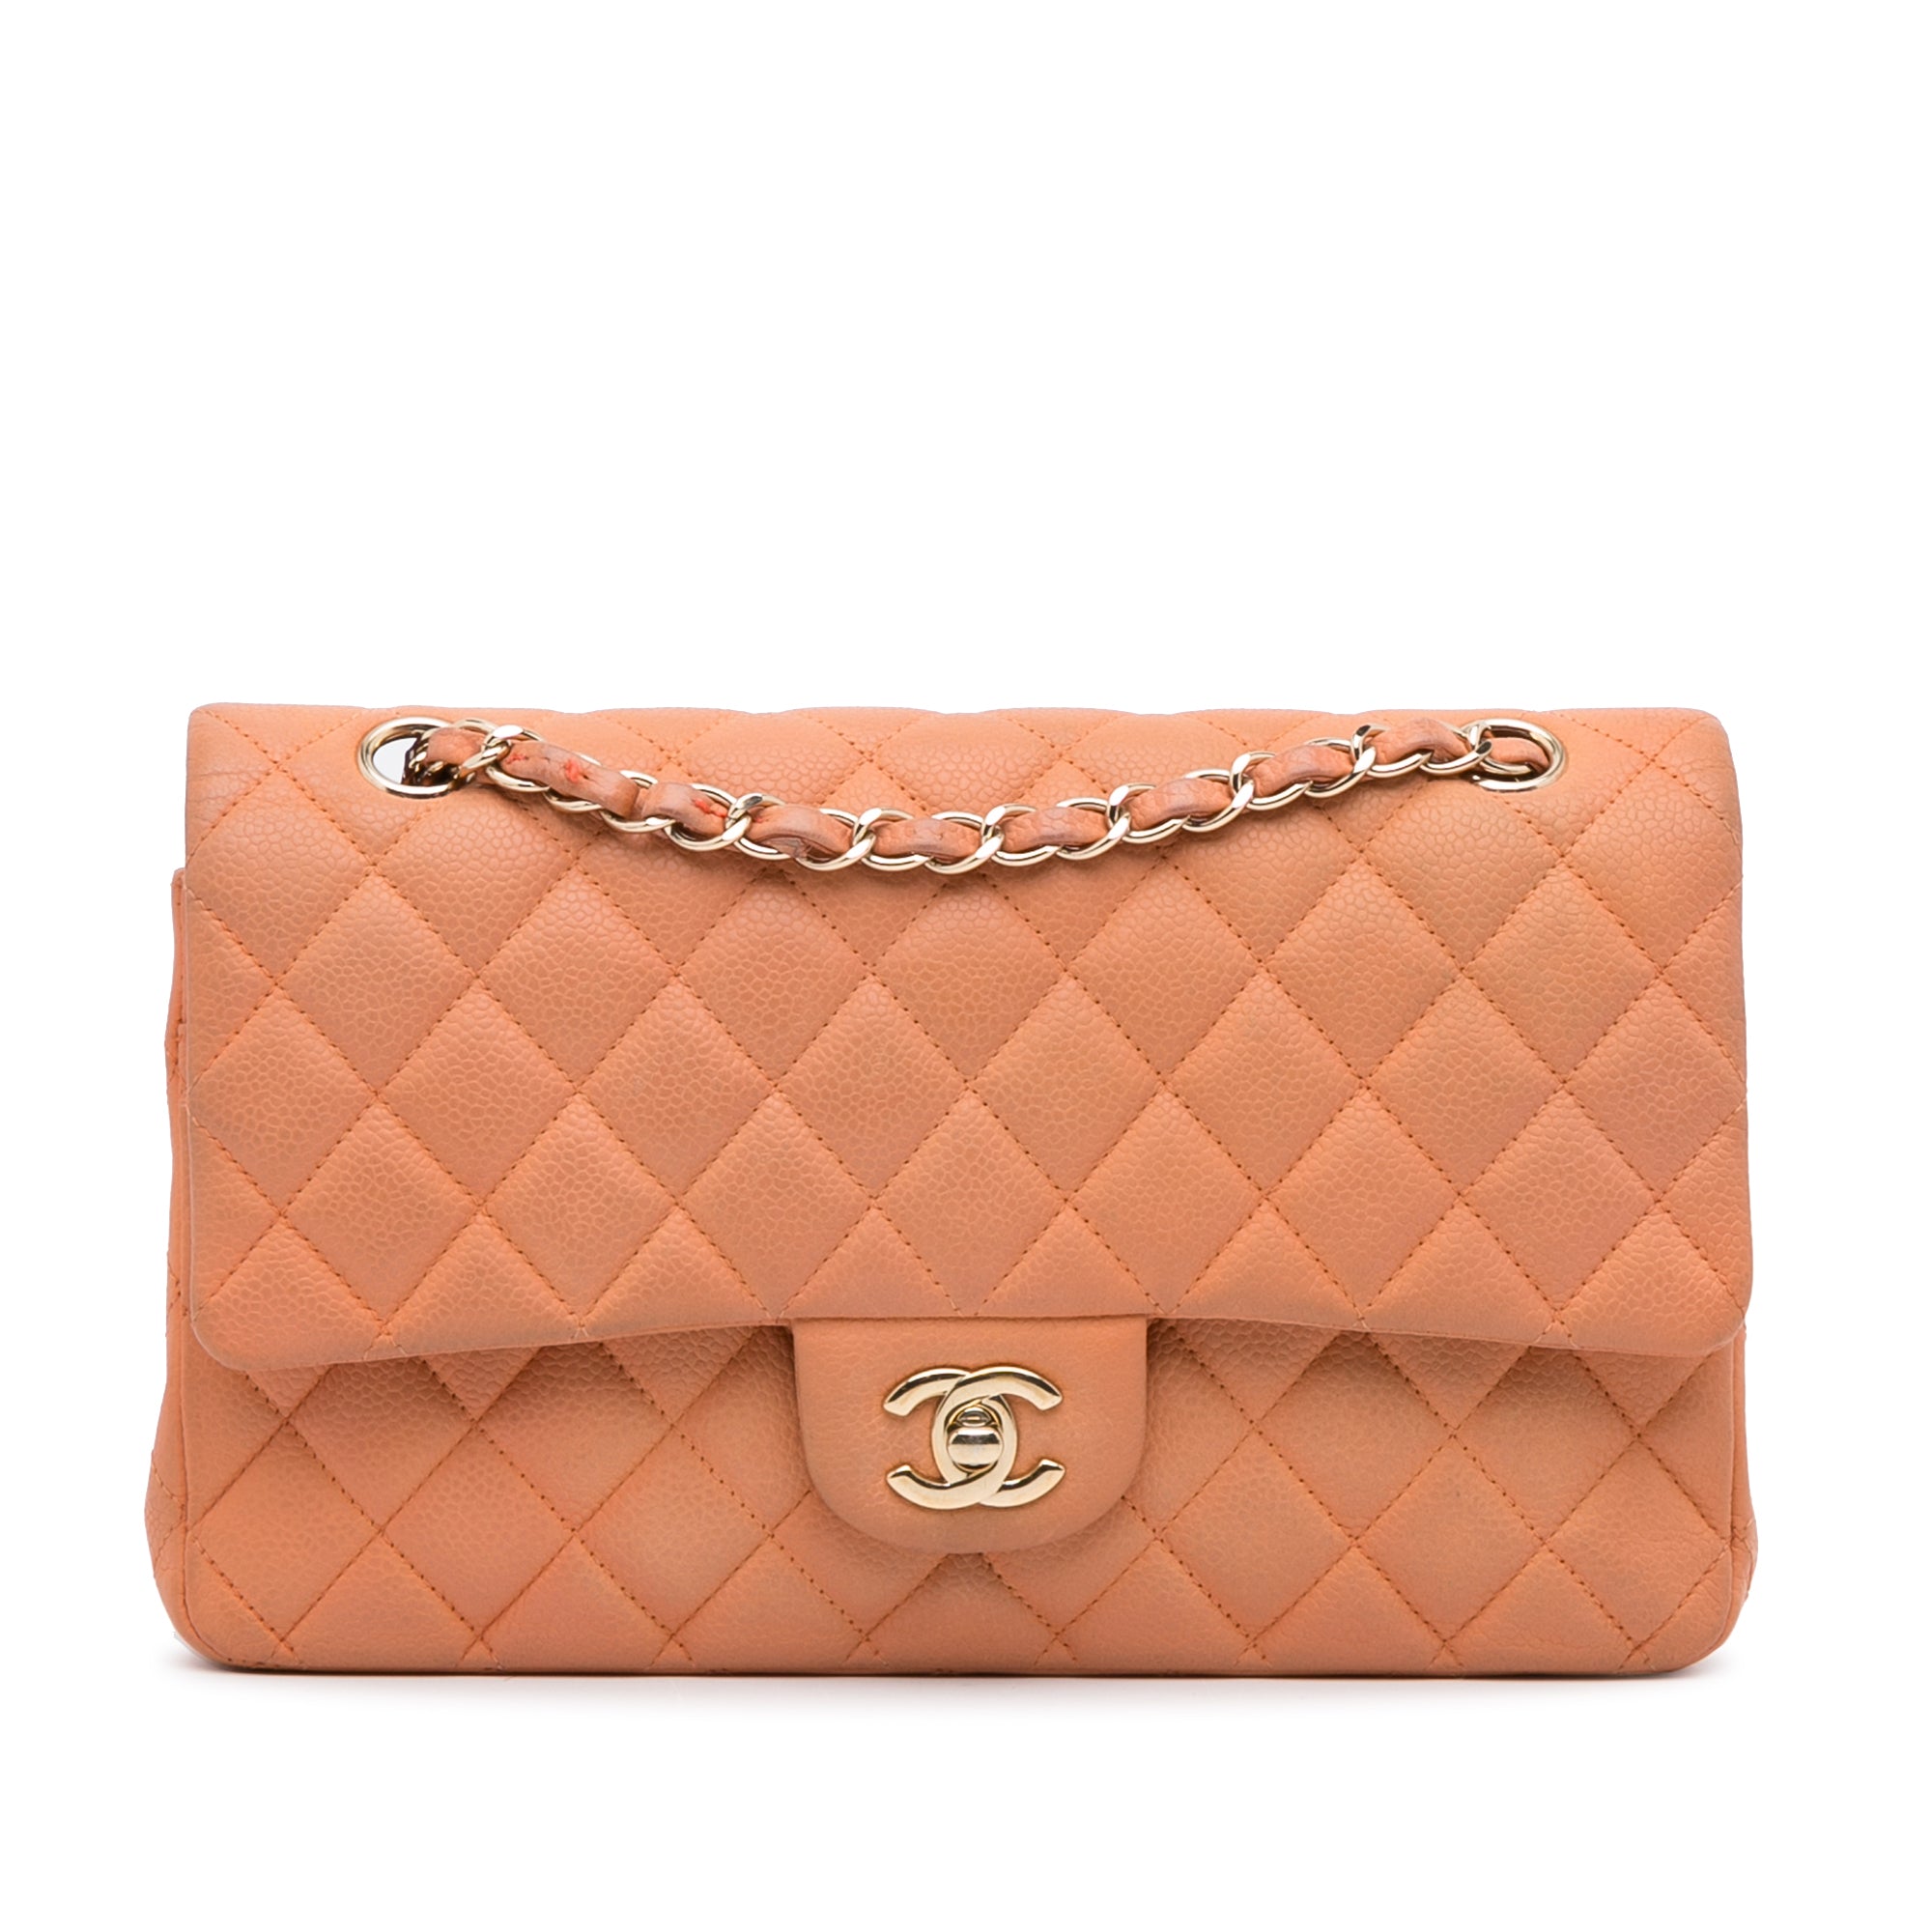 CHANEL 22C Orange Claire Beige Deauville Tote Peach Large Shopping Bag Pouch  NEW